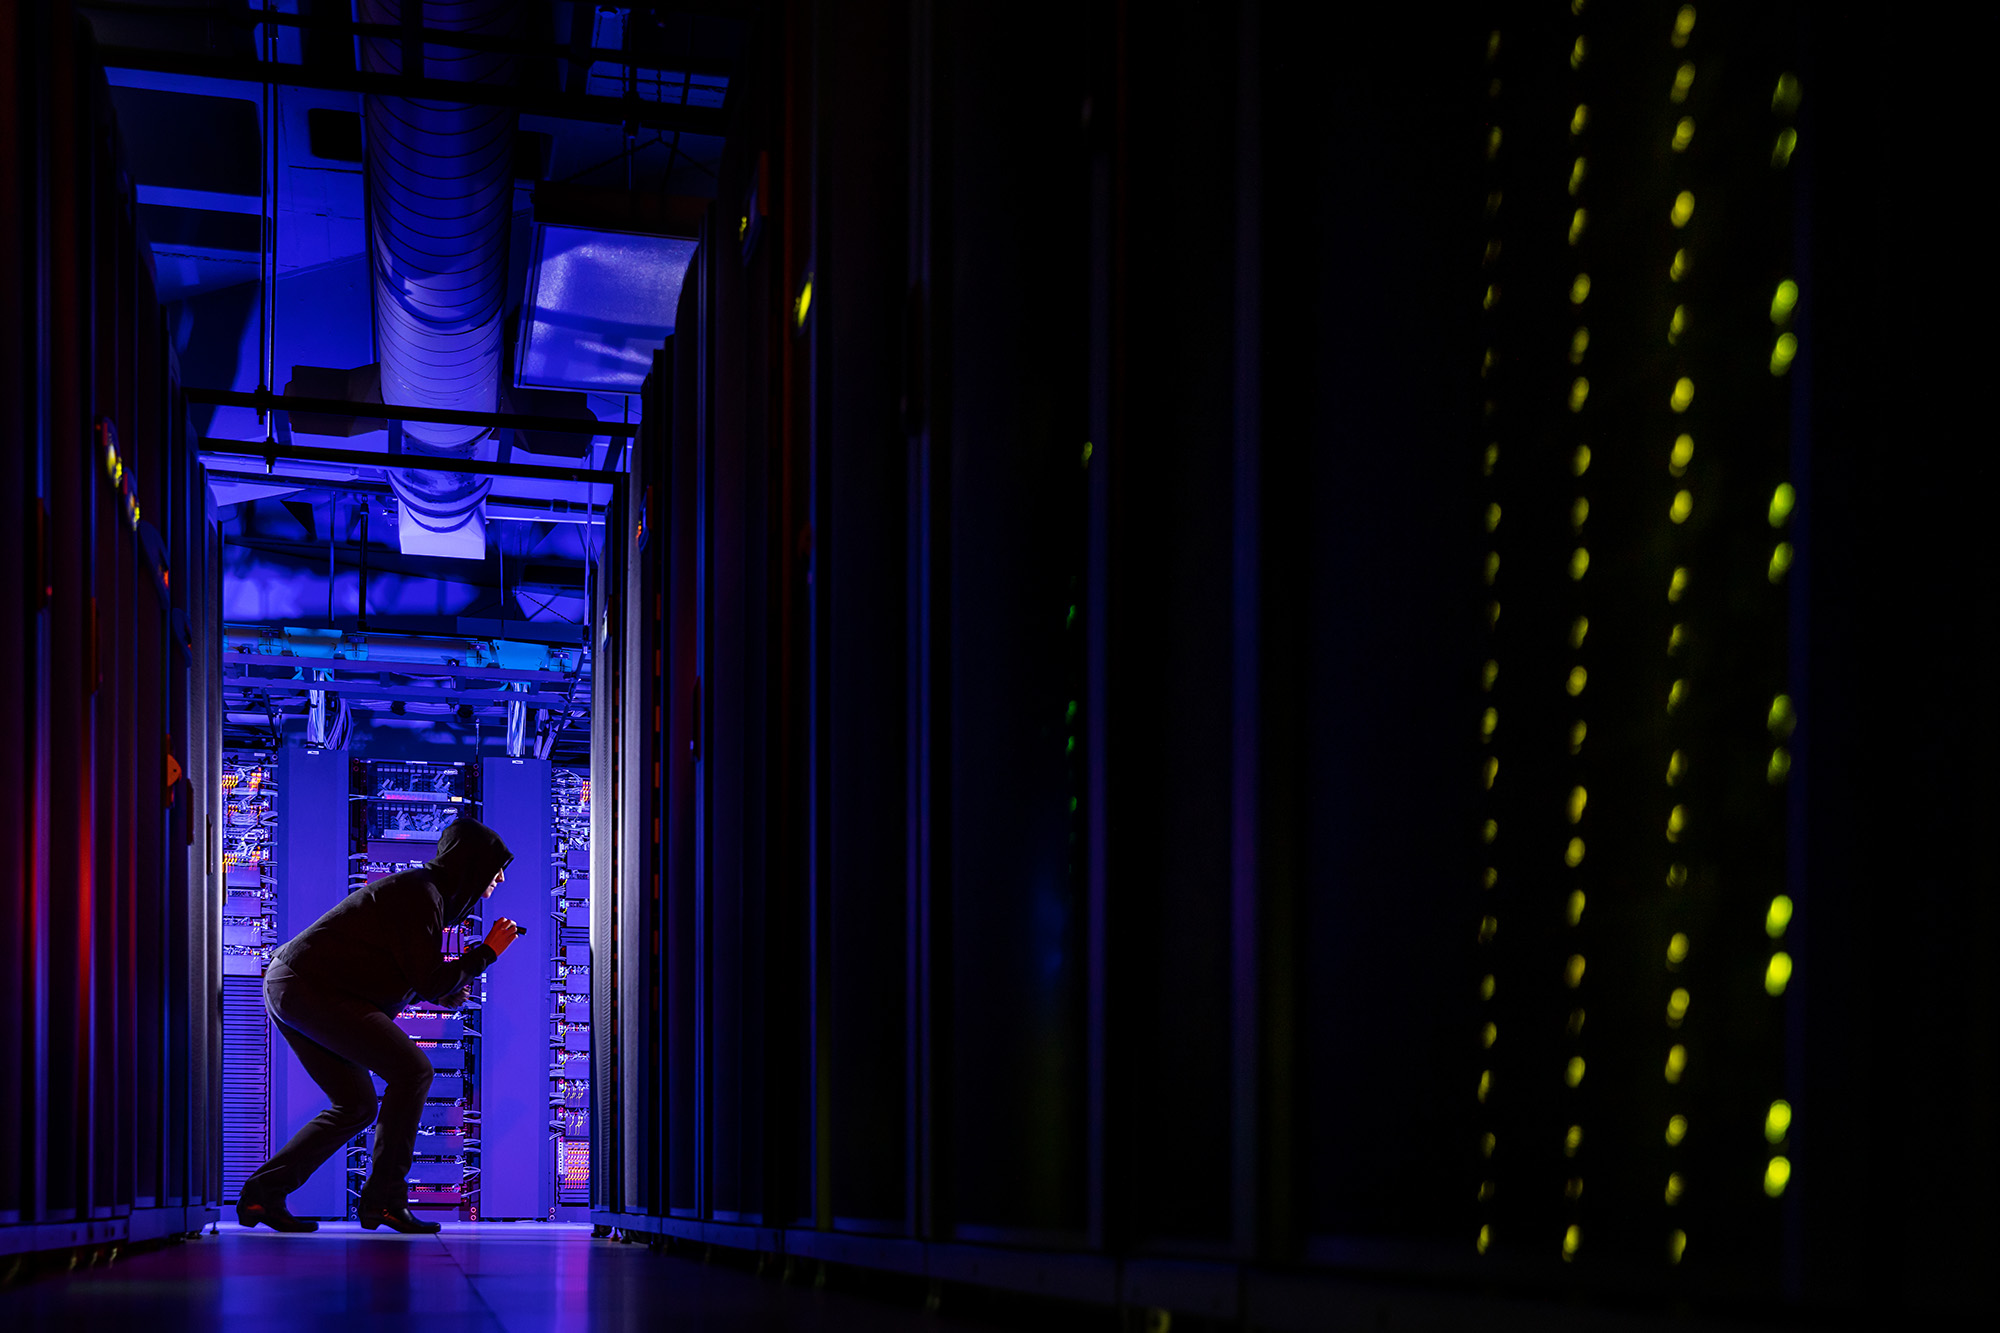 A black-hooded figure with a small flashlight appears to be snooping in a data center.